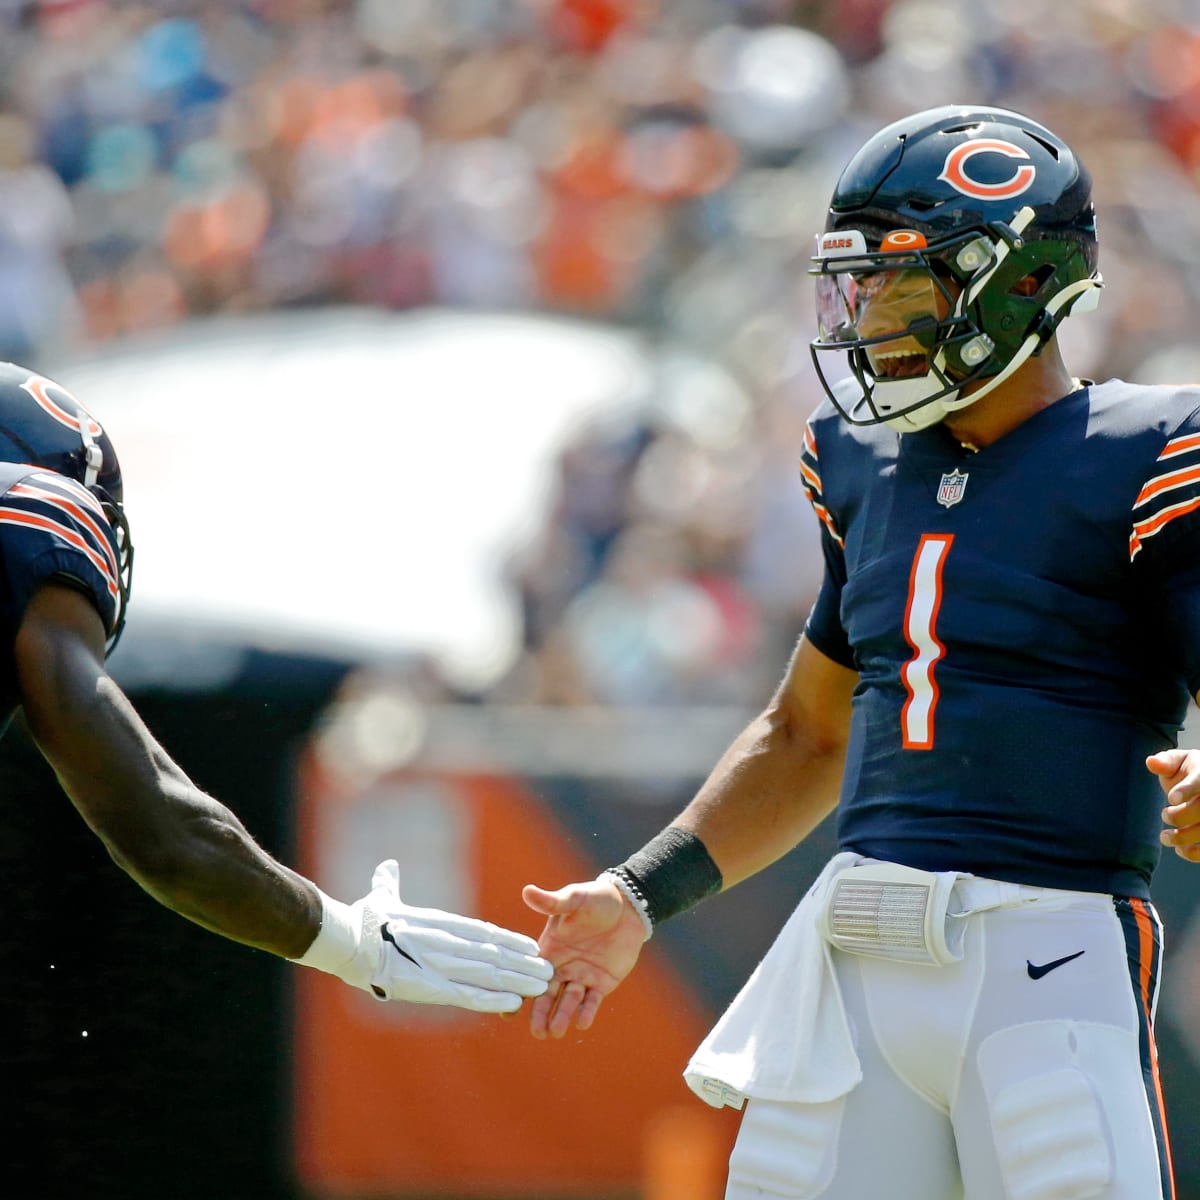 QB Justin Fields Rallies Bears to 20-13 Win Over Dolphins, Chicago News